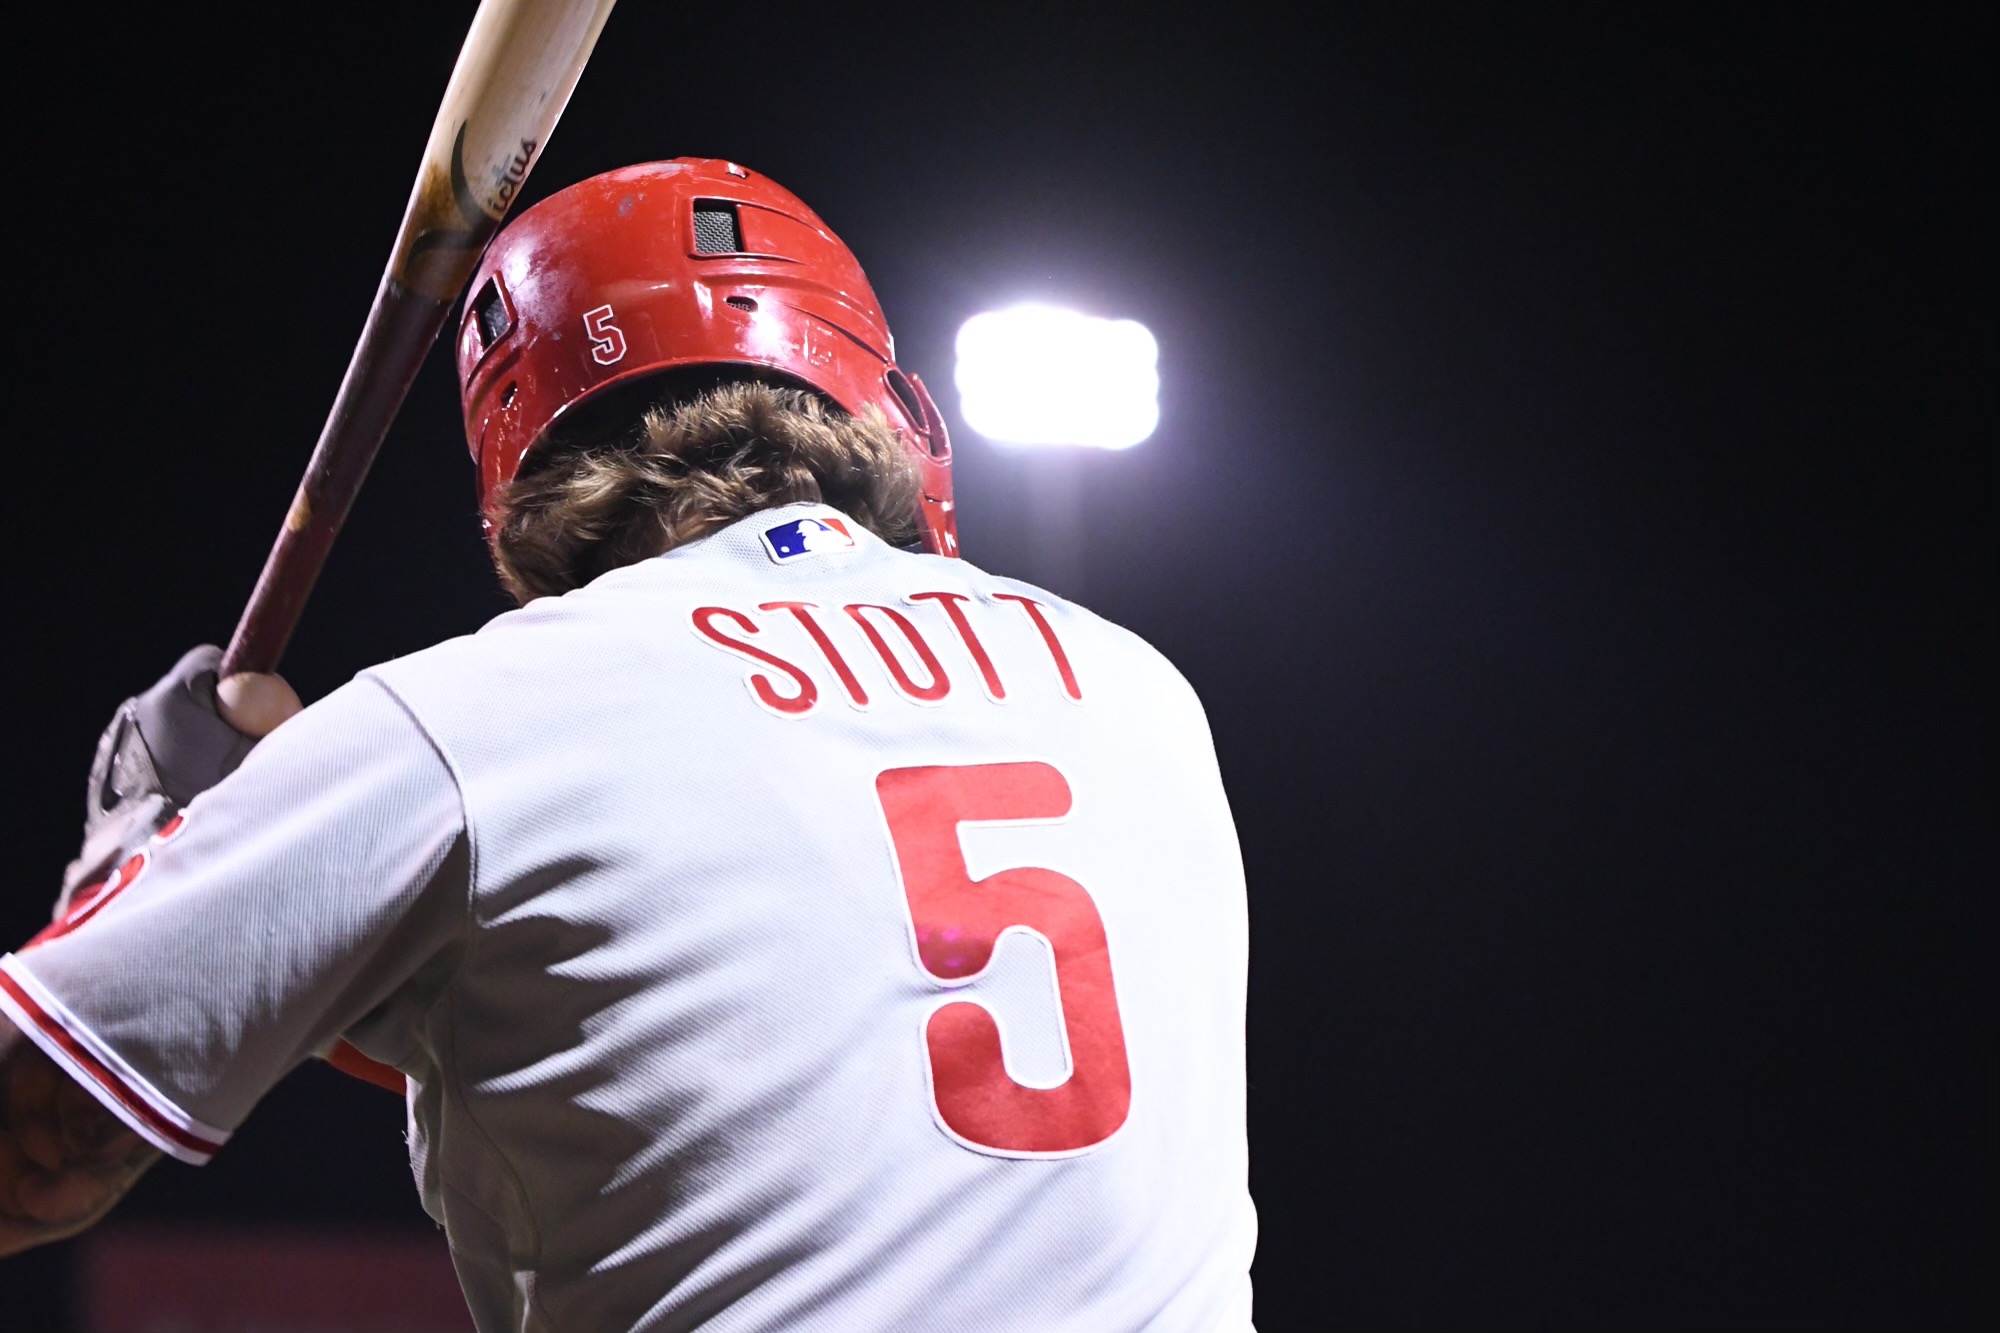 What they're saying: The Phillies' newfound fame has Bryson Stott